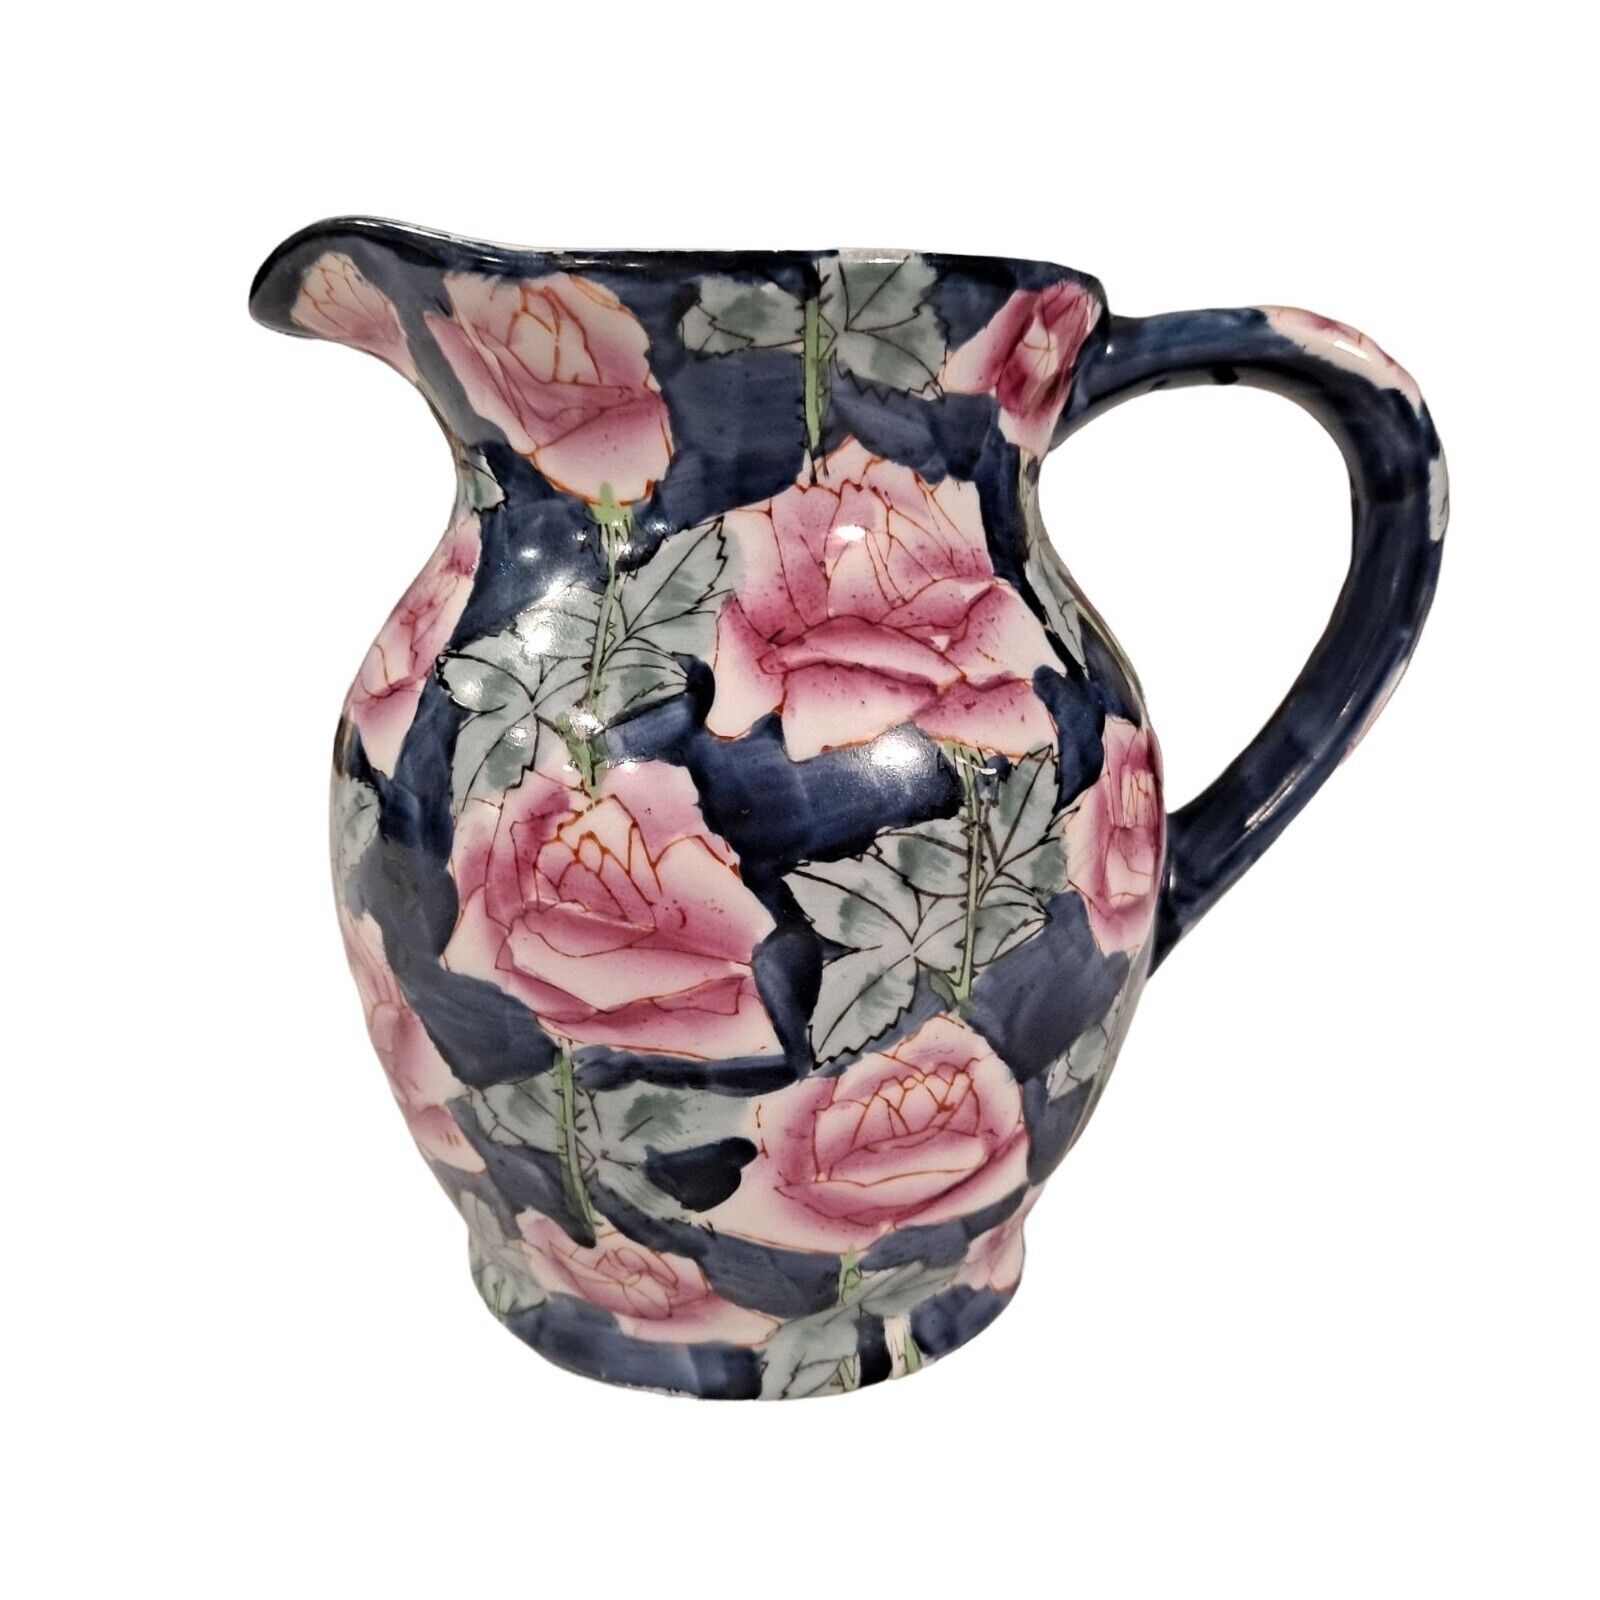 Cabbage Rose Porcelain Pitcher Hand Painted Cobalt Blue And Pink